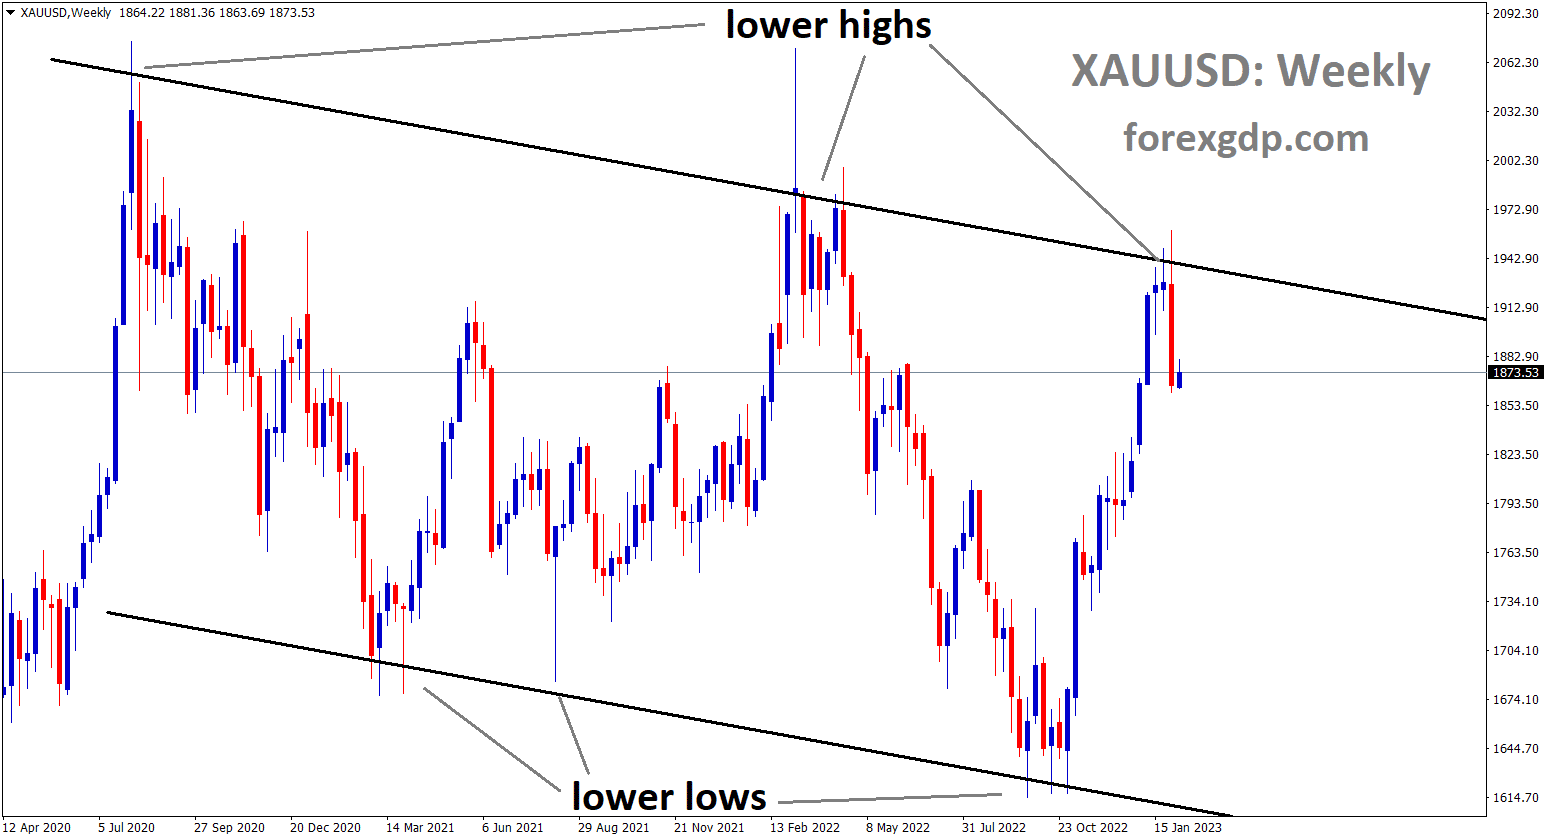 XAUUSD is moving in Descending channel and the market has fallen from the lower high area of the channel.